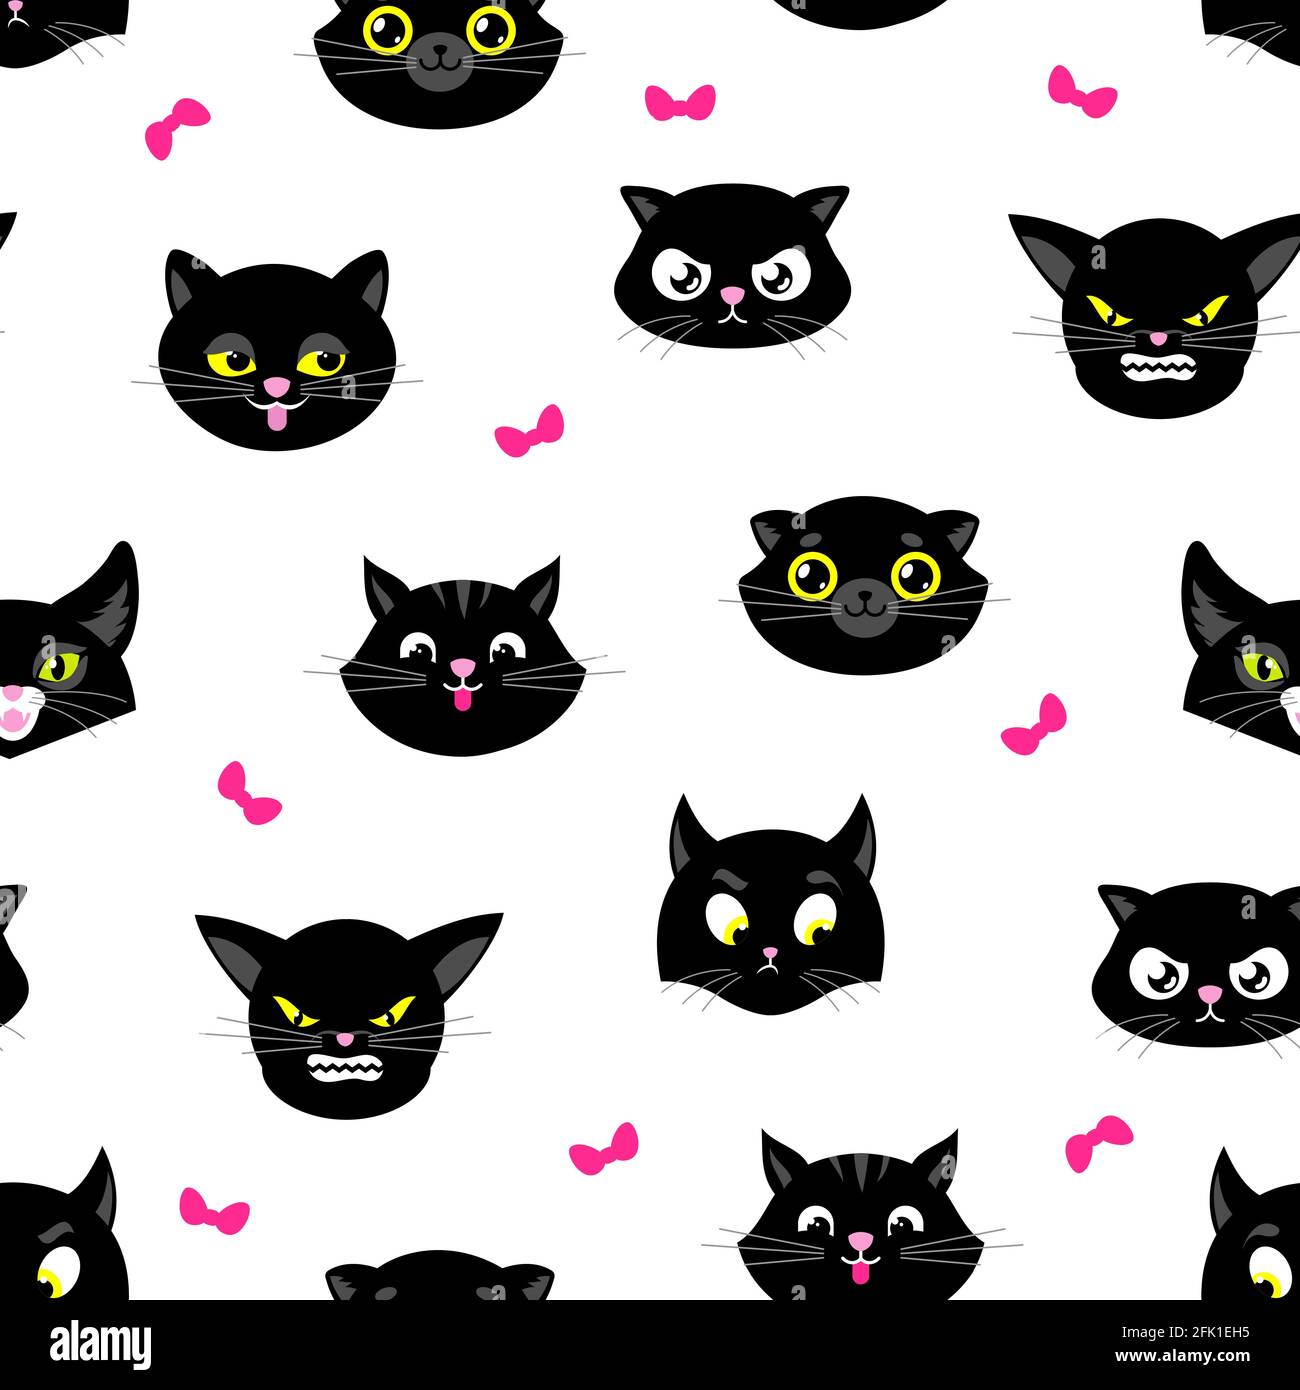 Set Of Black Cat Emoji Crazy Kitten With Different Emotions Angry Skeptical  Happy Funny Cat Breaking Things Comic Illustration Cartoon Vector Drawing  Stock Illustration - Download Image Now - iStock